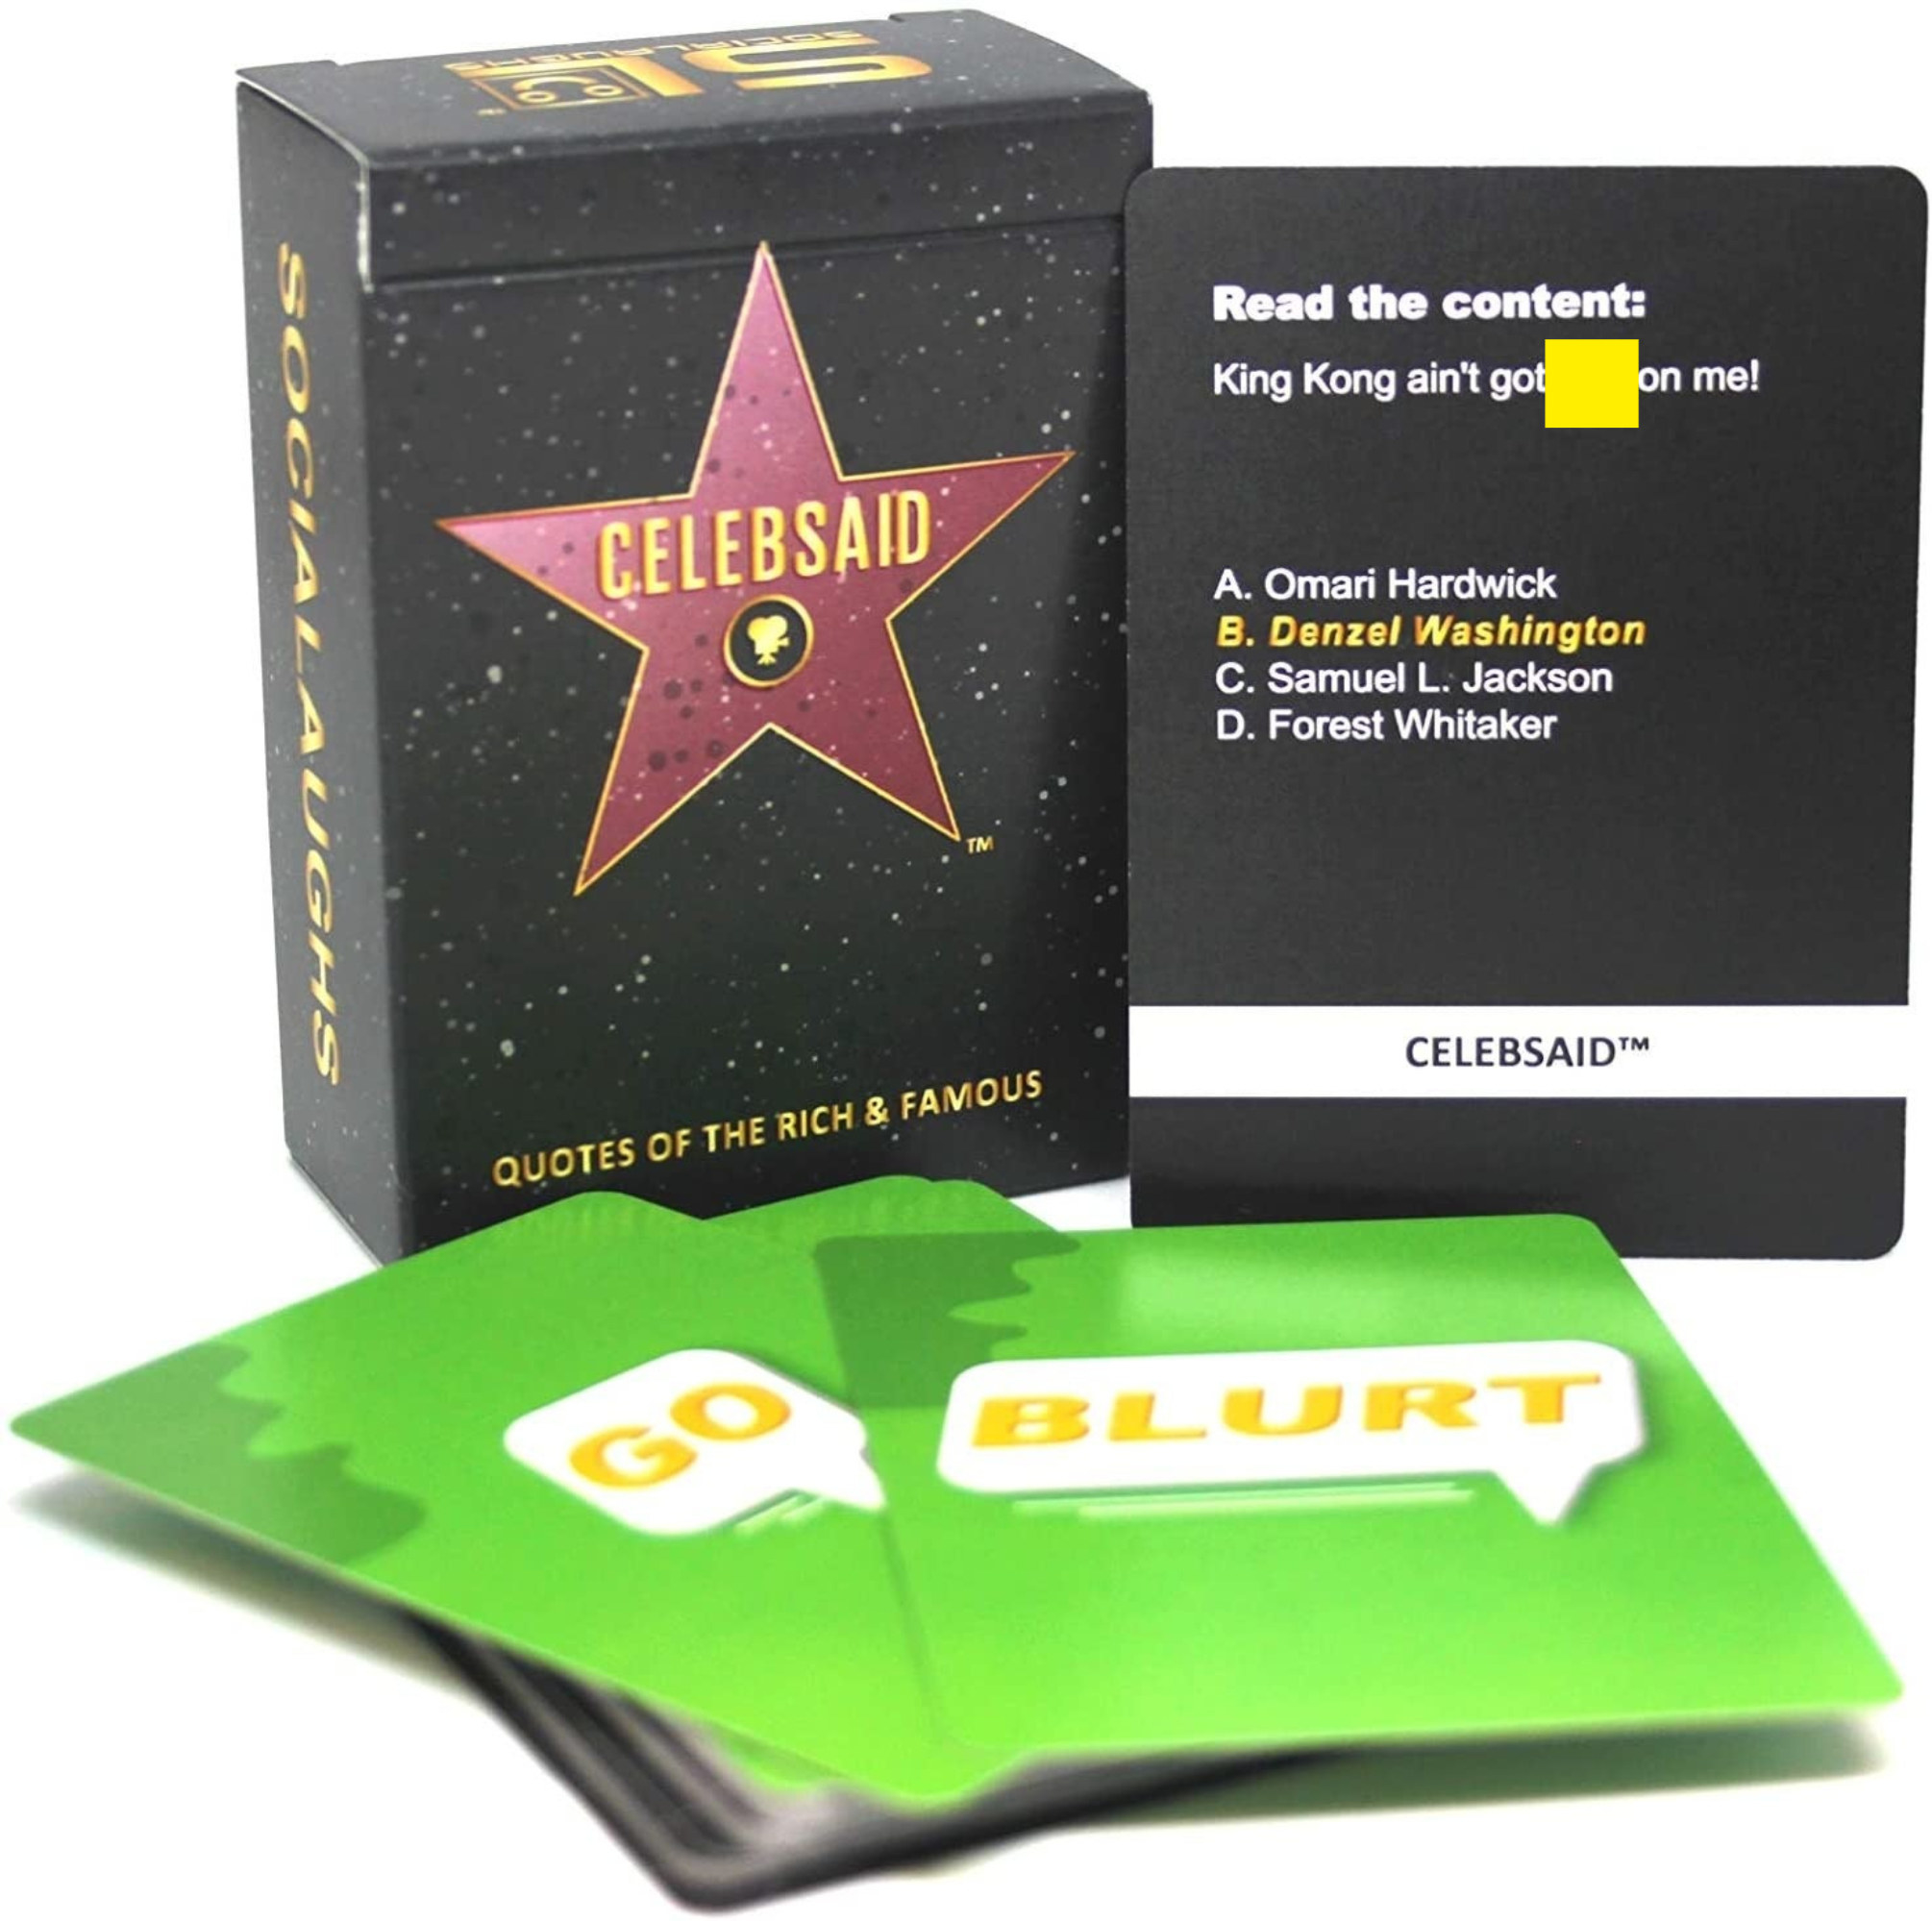 The card game and its box, with an example card asking which celebrity said &quot;King Kong ain&#x27;t got [expletive] on me!&quot; with the options Omari Hardwick, Denzel Washington. Samuel L. Jackson, and Forest Whitaker